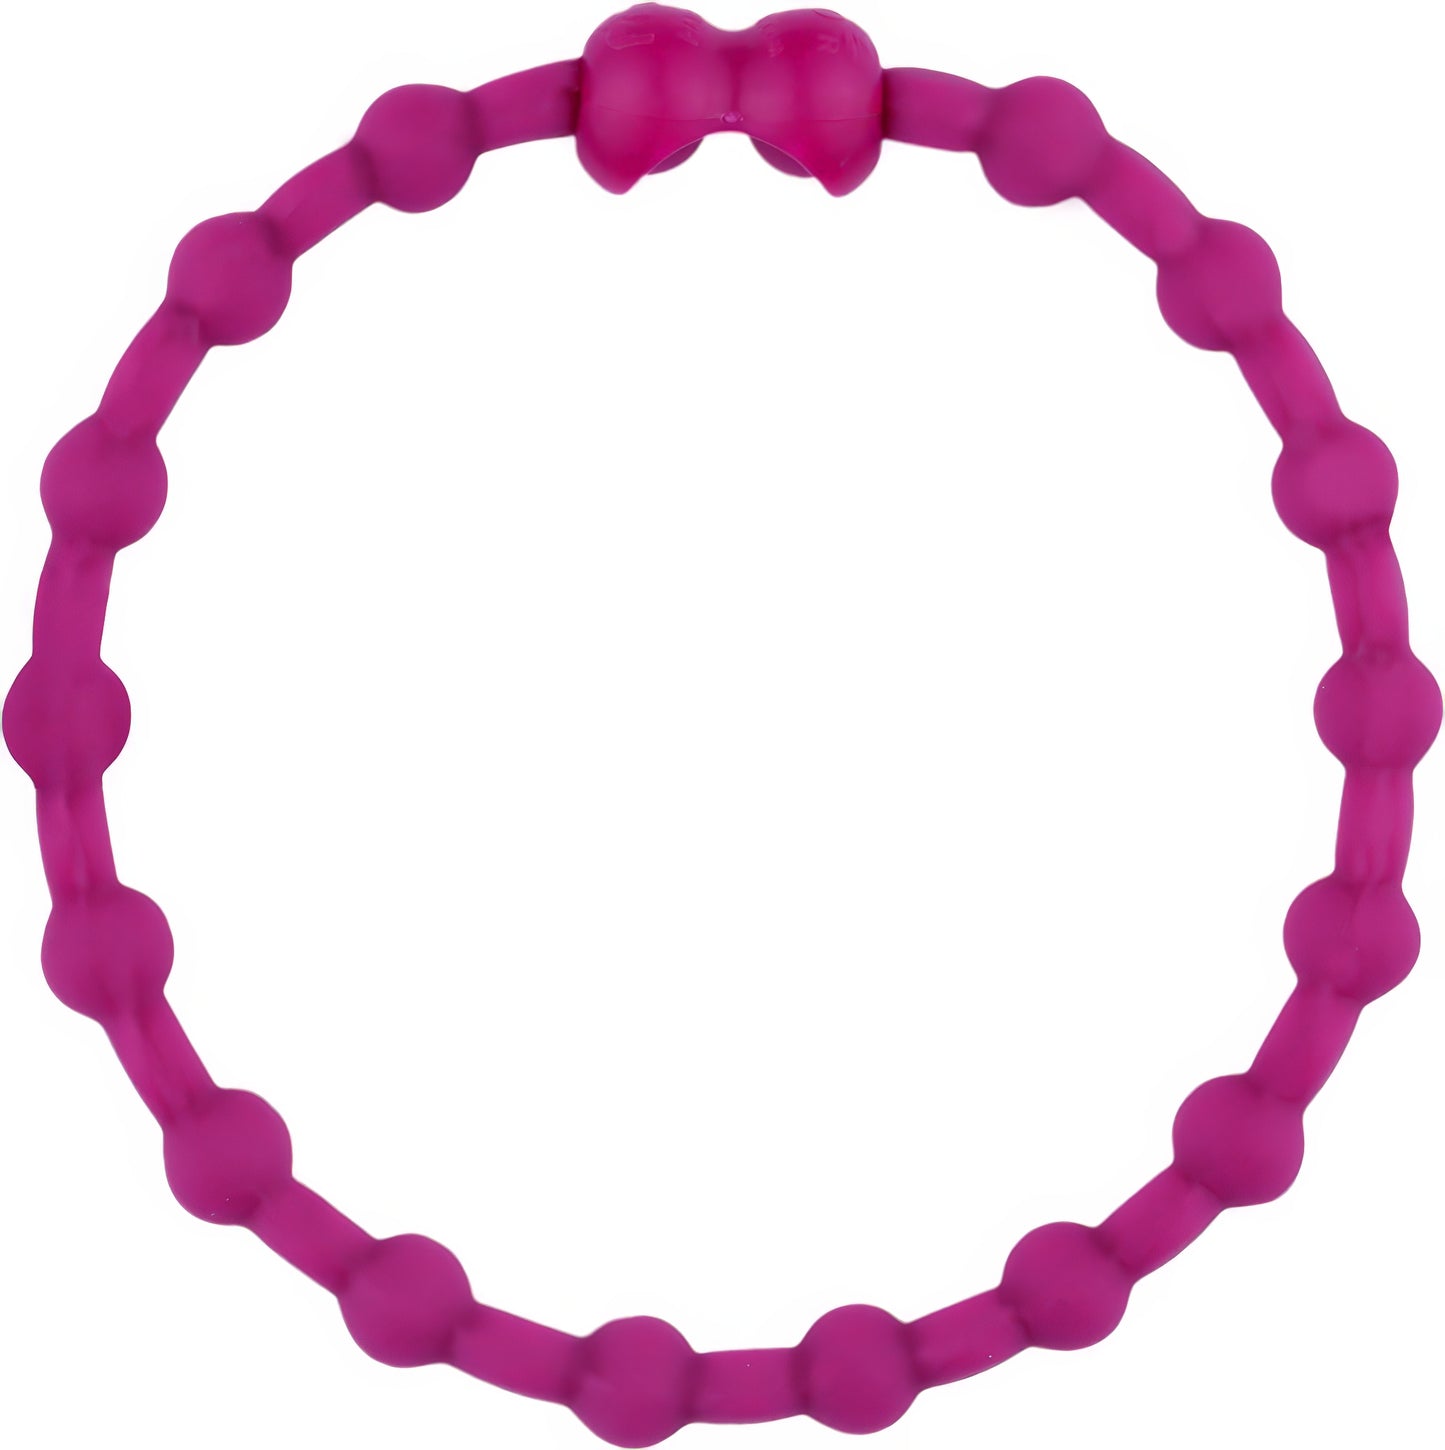 Wild Berry Hair Tie Pack (6-Pack) - A Burst of Fruity Fun for Every Look (Unique Design)